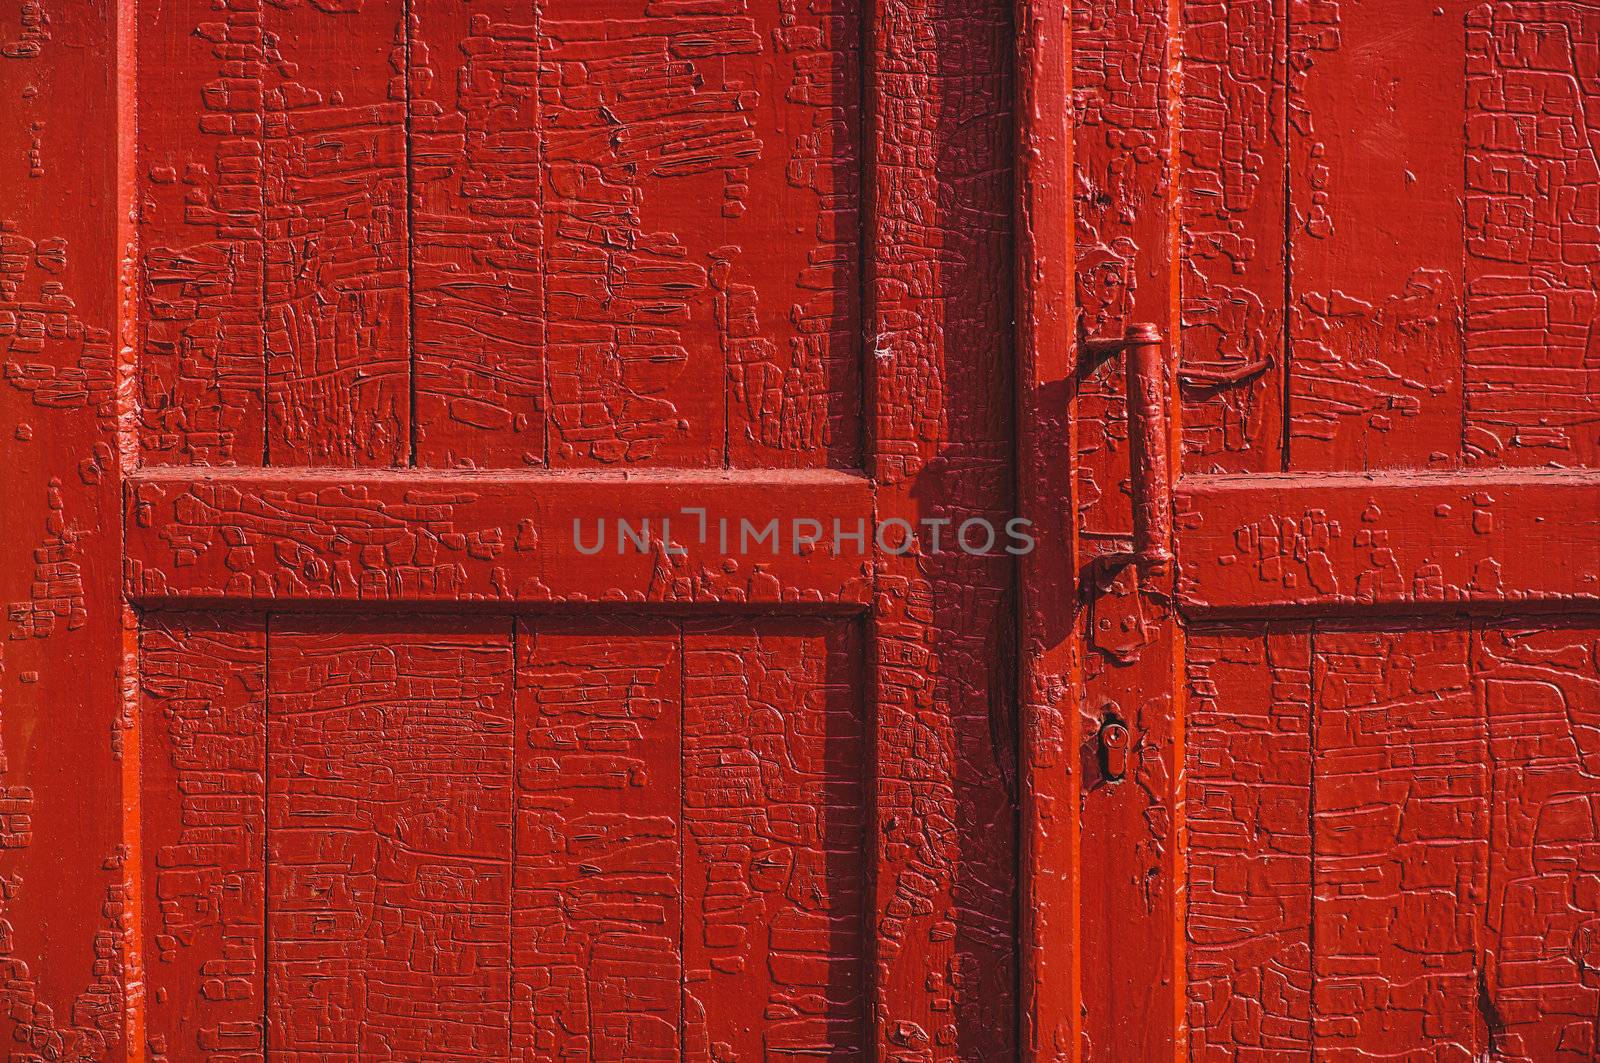 An old wood door with cracked red paint and grunge